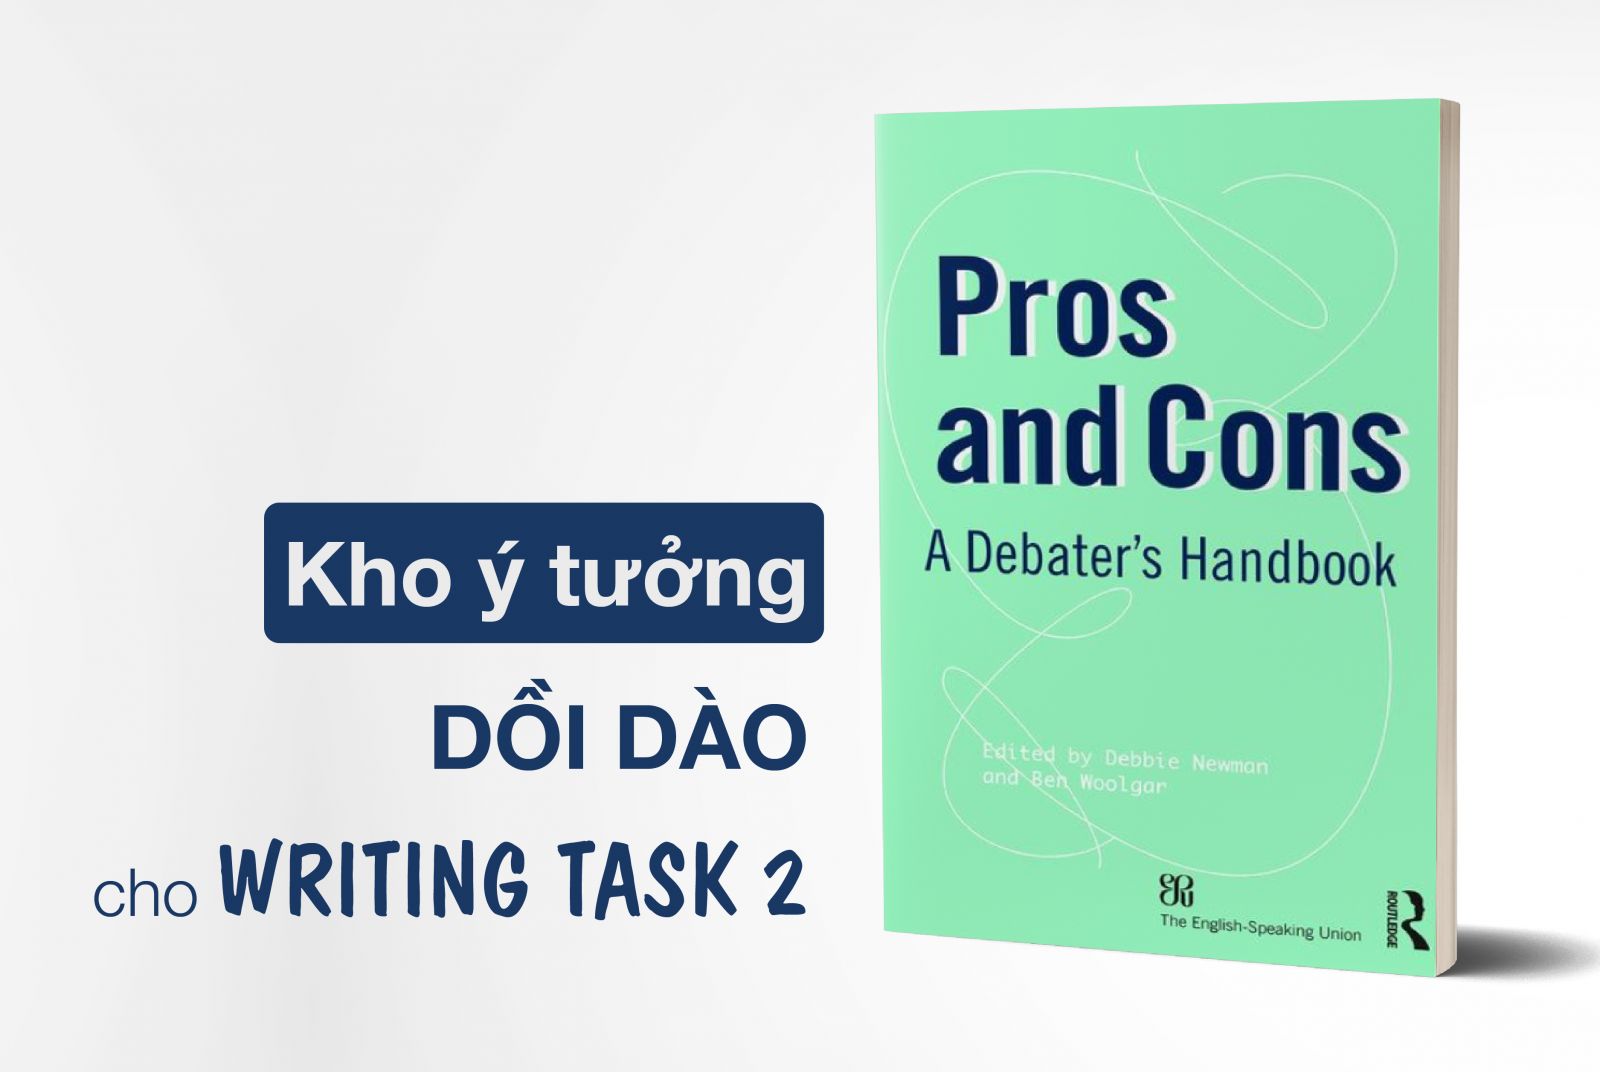 Pros and Cons – A Handbook for Debater (19th edition)